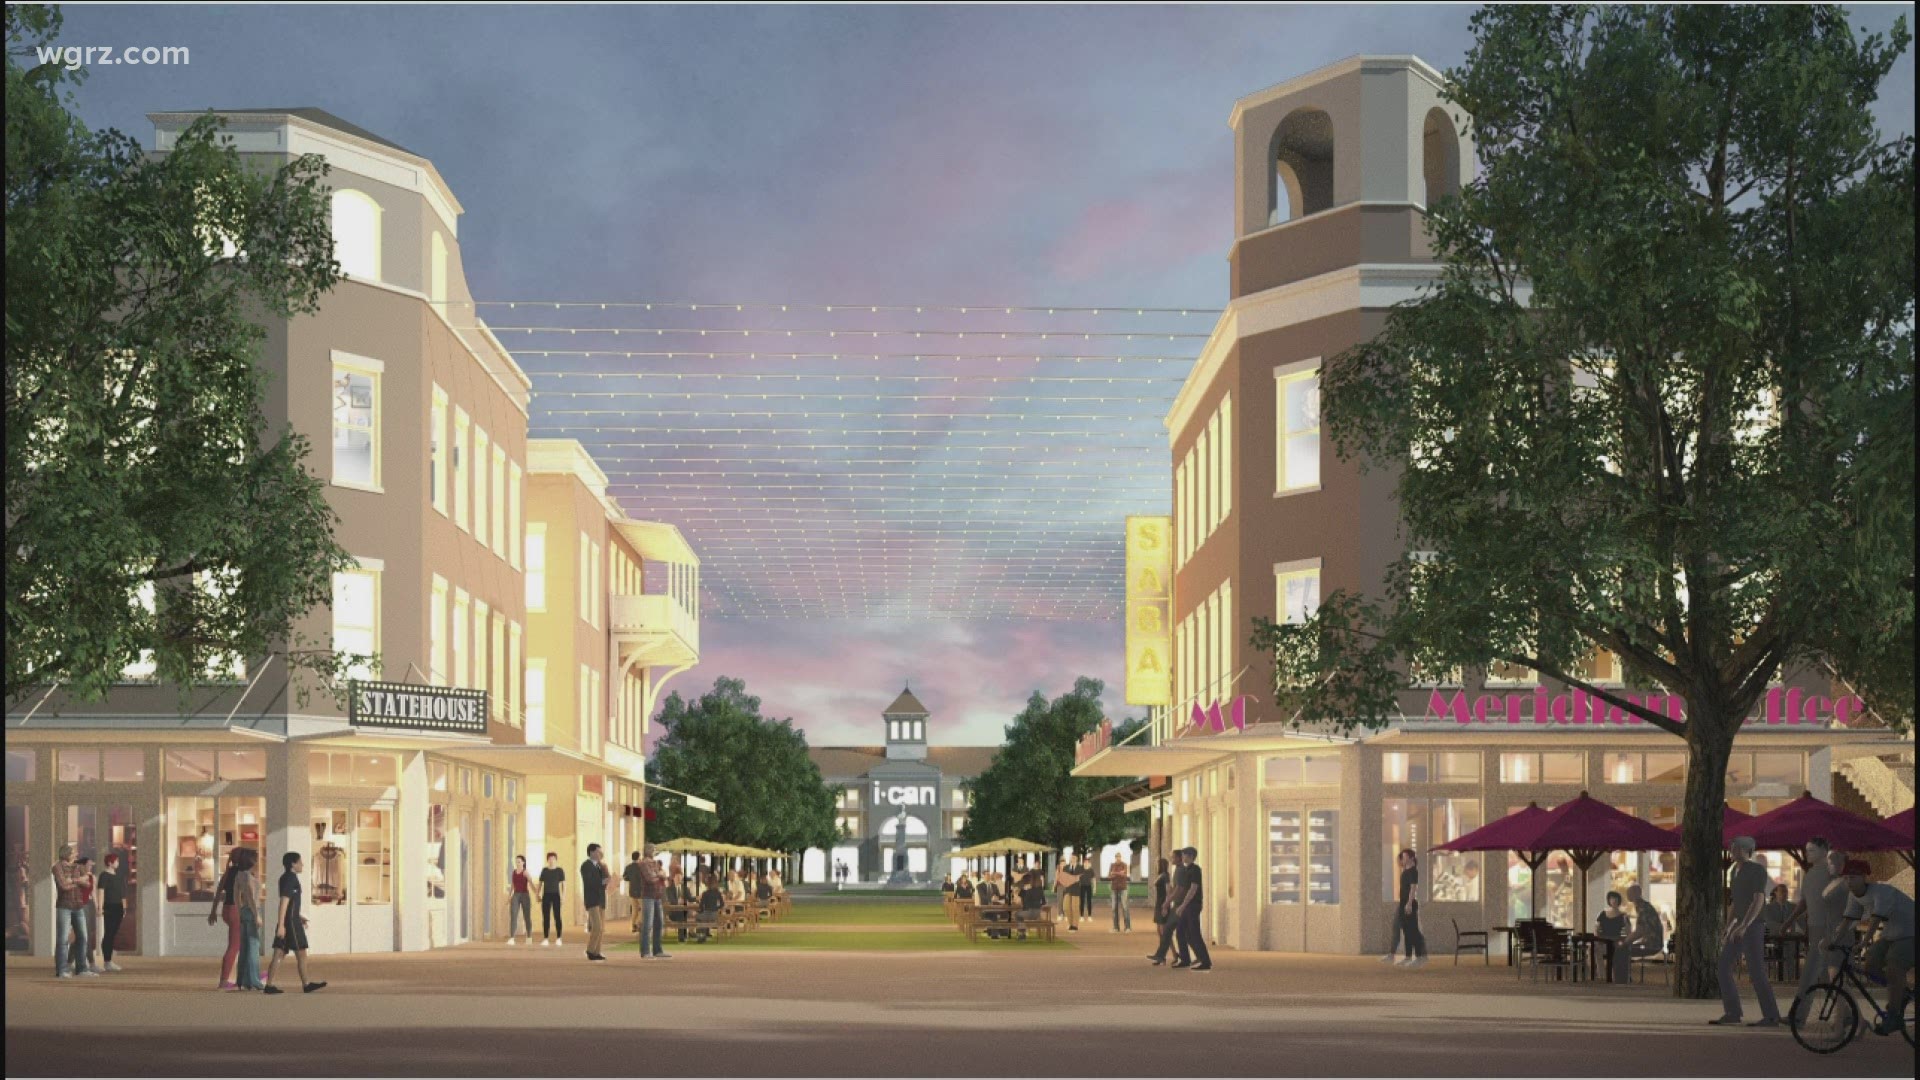 There are big changes coming to the boulevard mall. Amherst town supervisor sent us these renderings and described the project as a "new urban neighborhood."